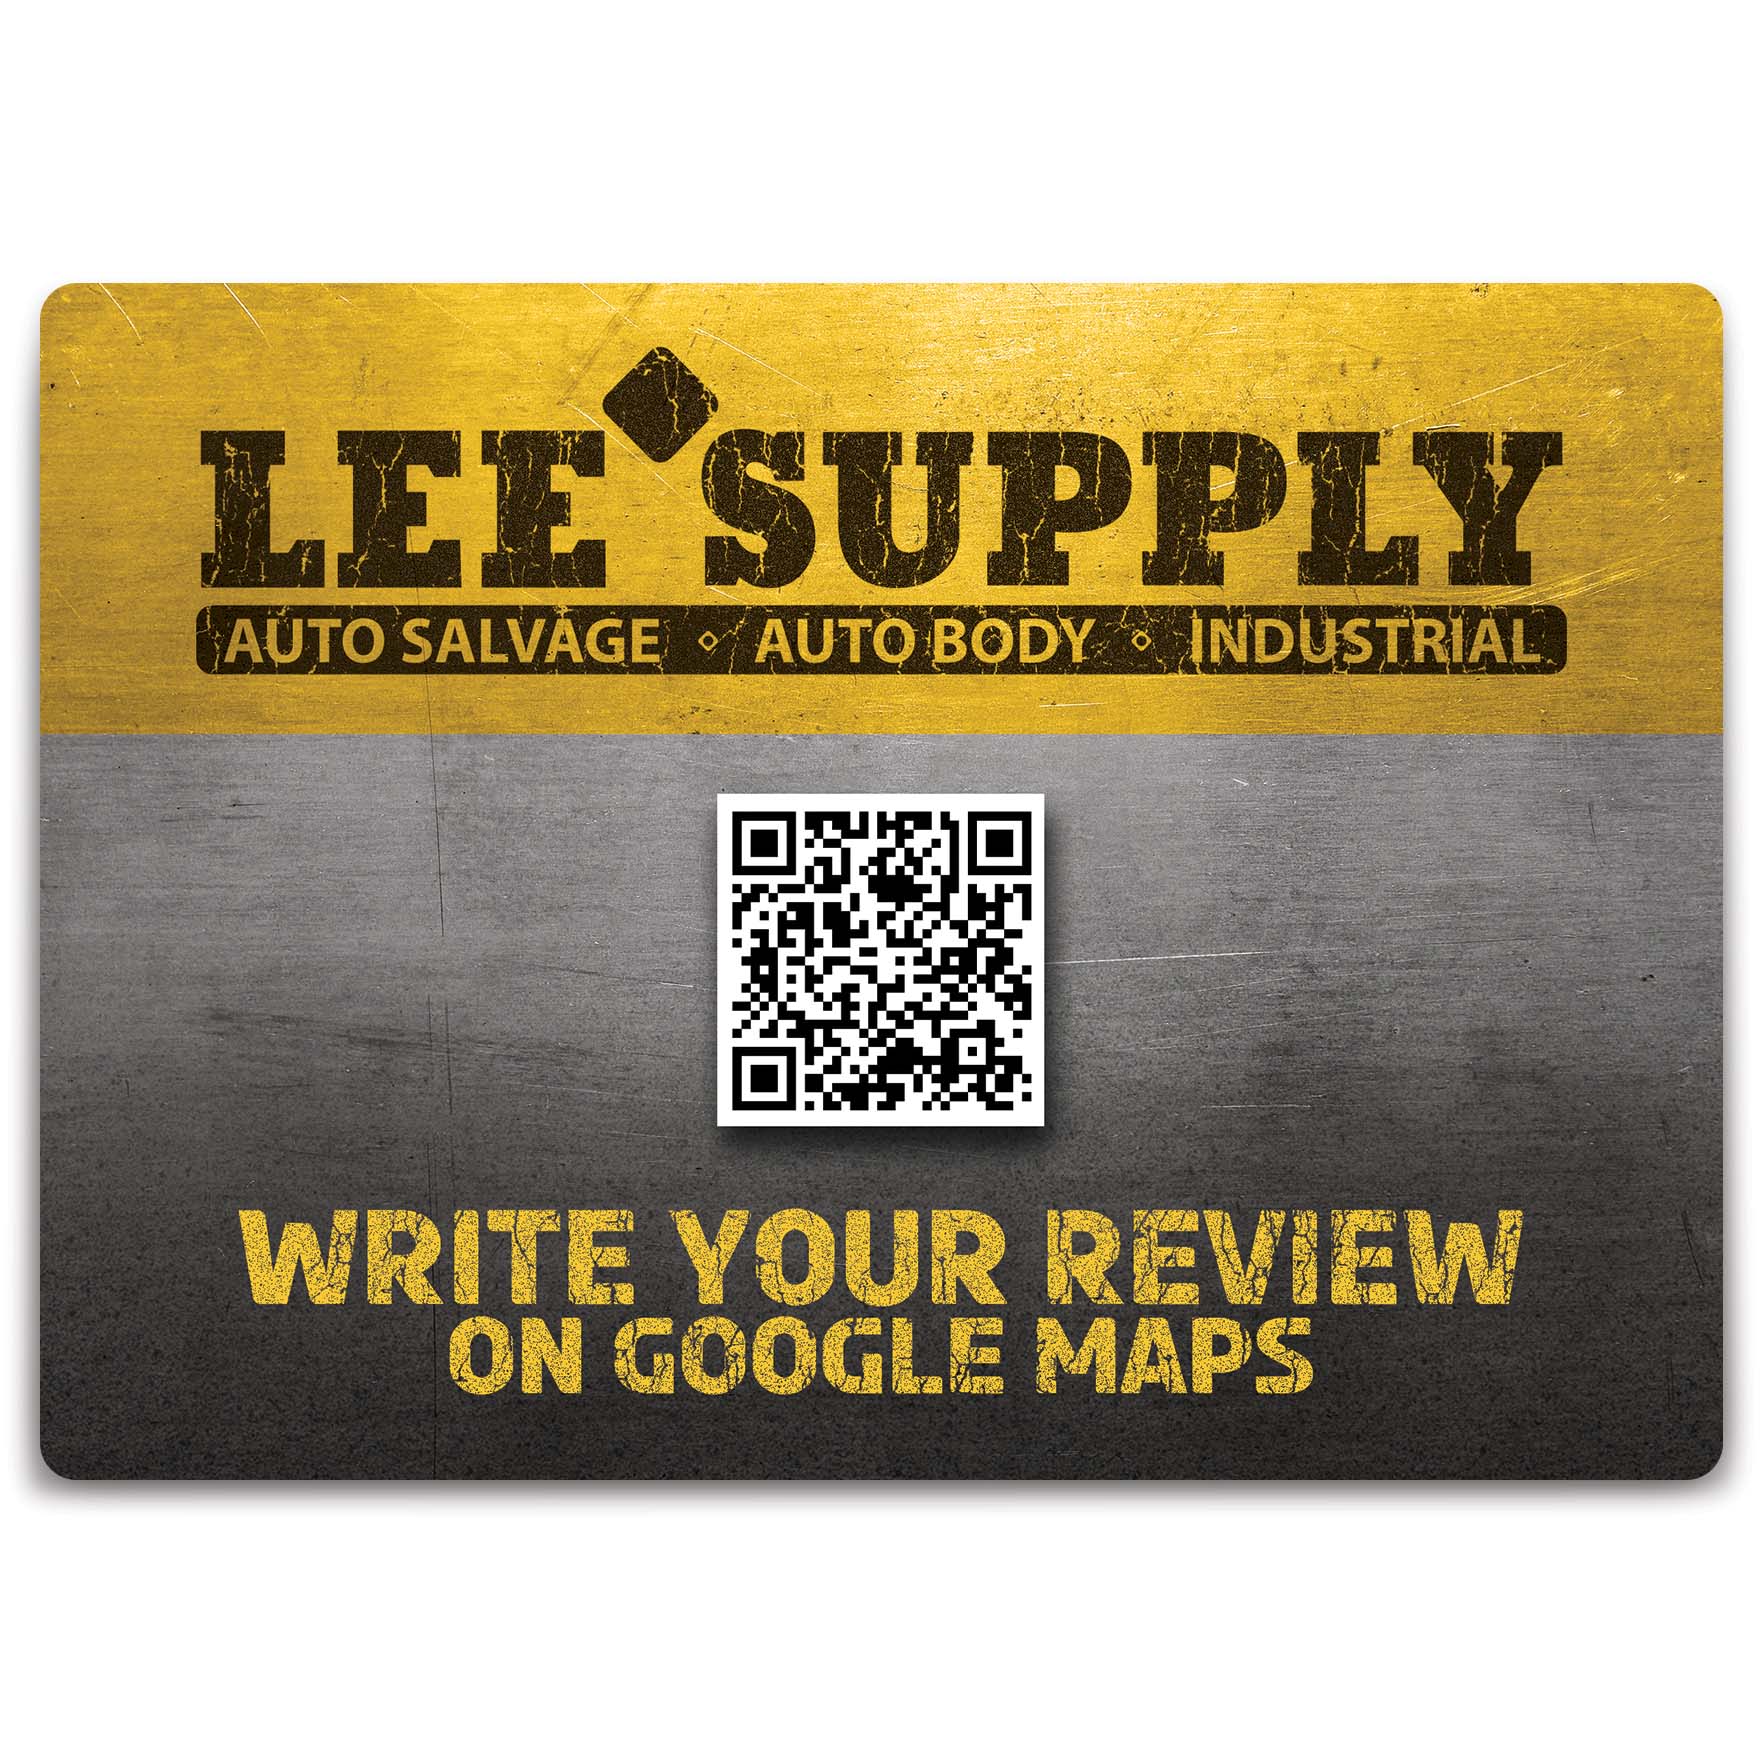 Marketing for Industrial Supplier to Get Google Reviews